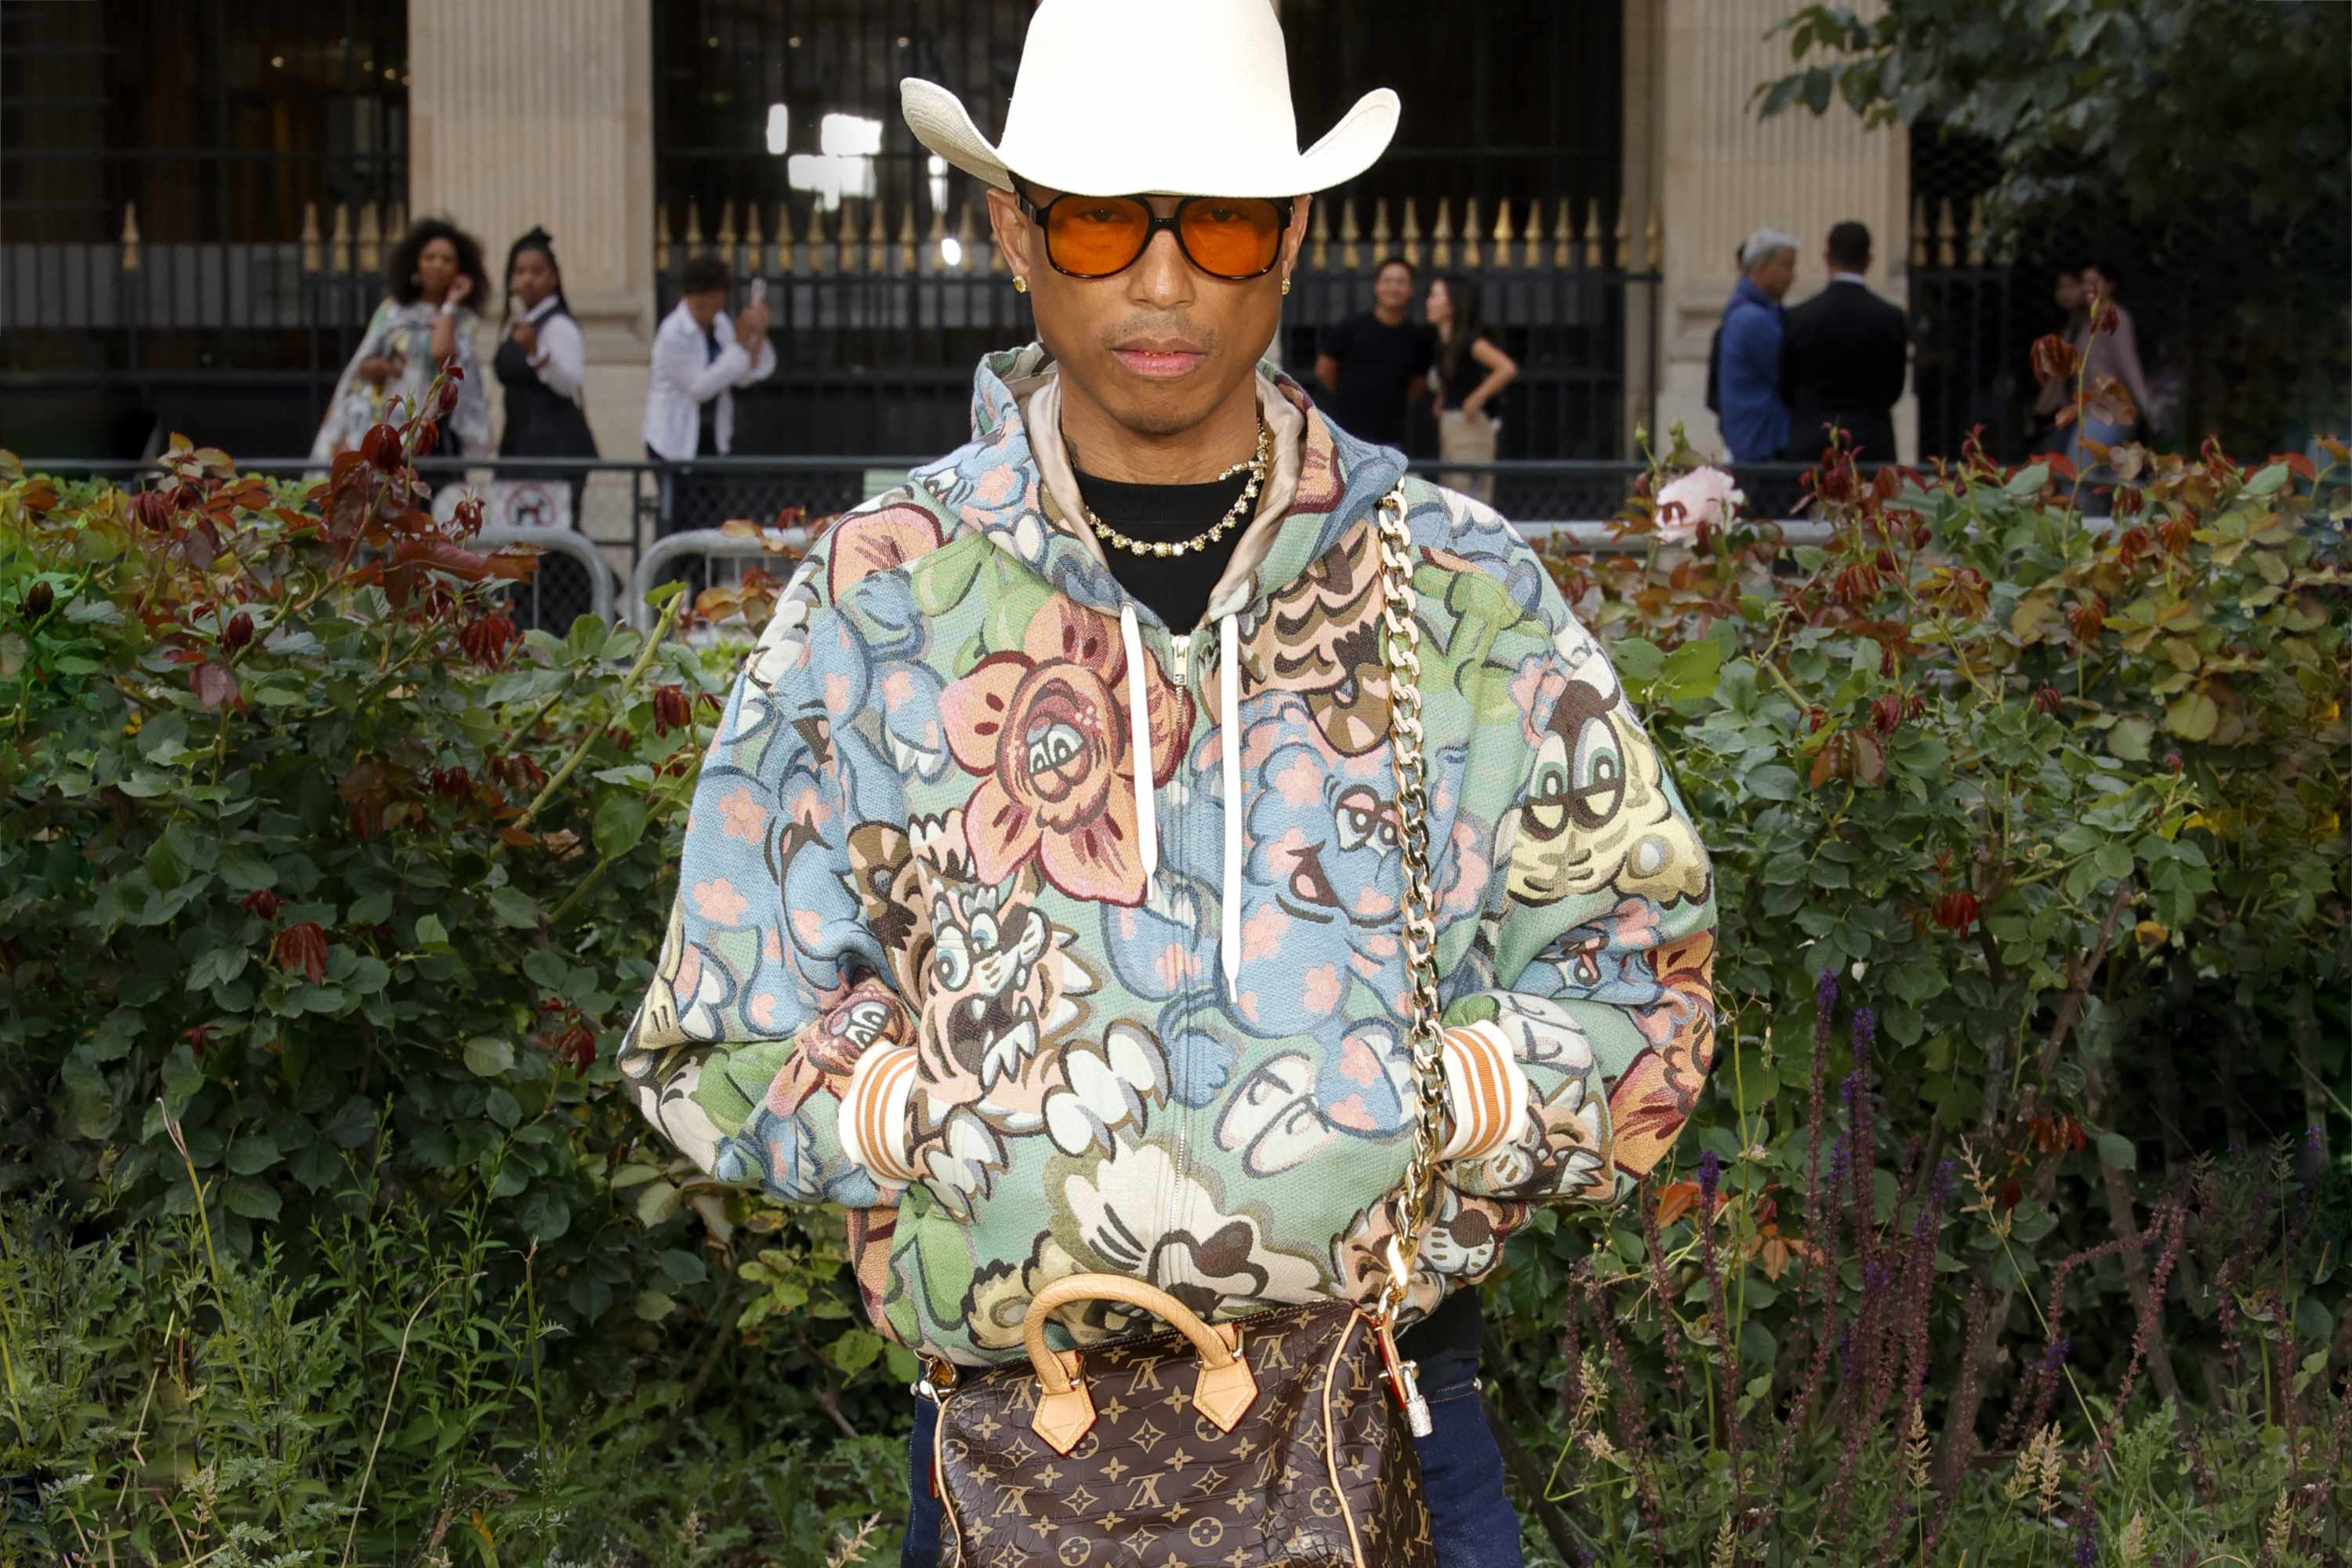 Pharrell wearing a white cowboy hat, patterned jacket, flared blue jeans, adidas sneakers, and $850 louis vuitton millionaires speedy bag